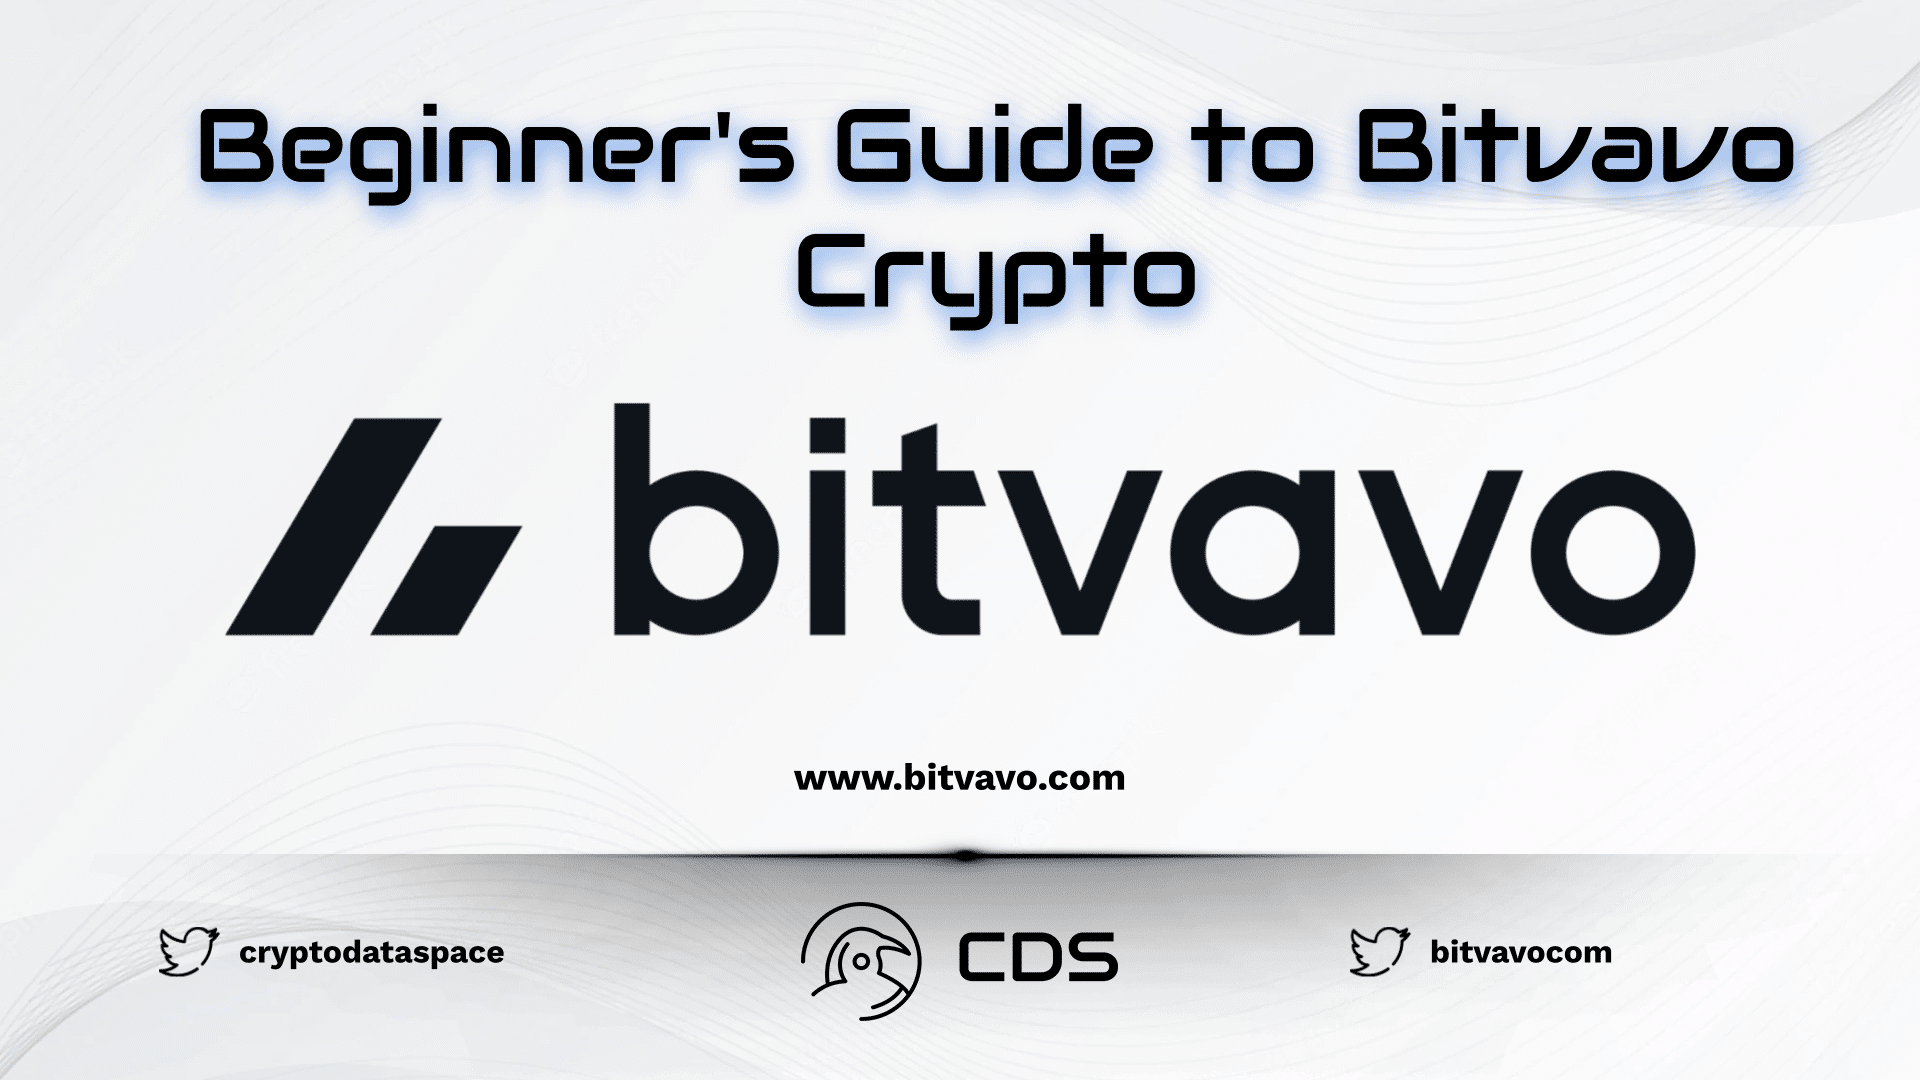 Beginner's Guide to Bitvavo Crypto